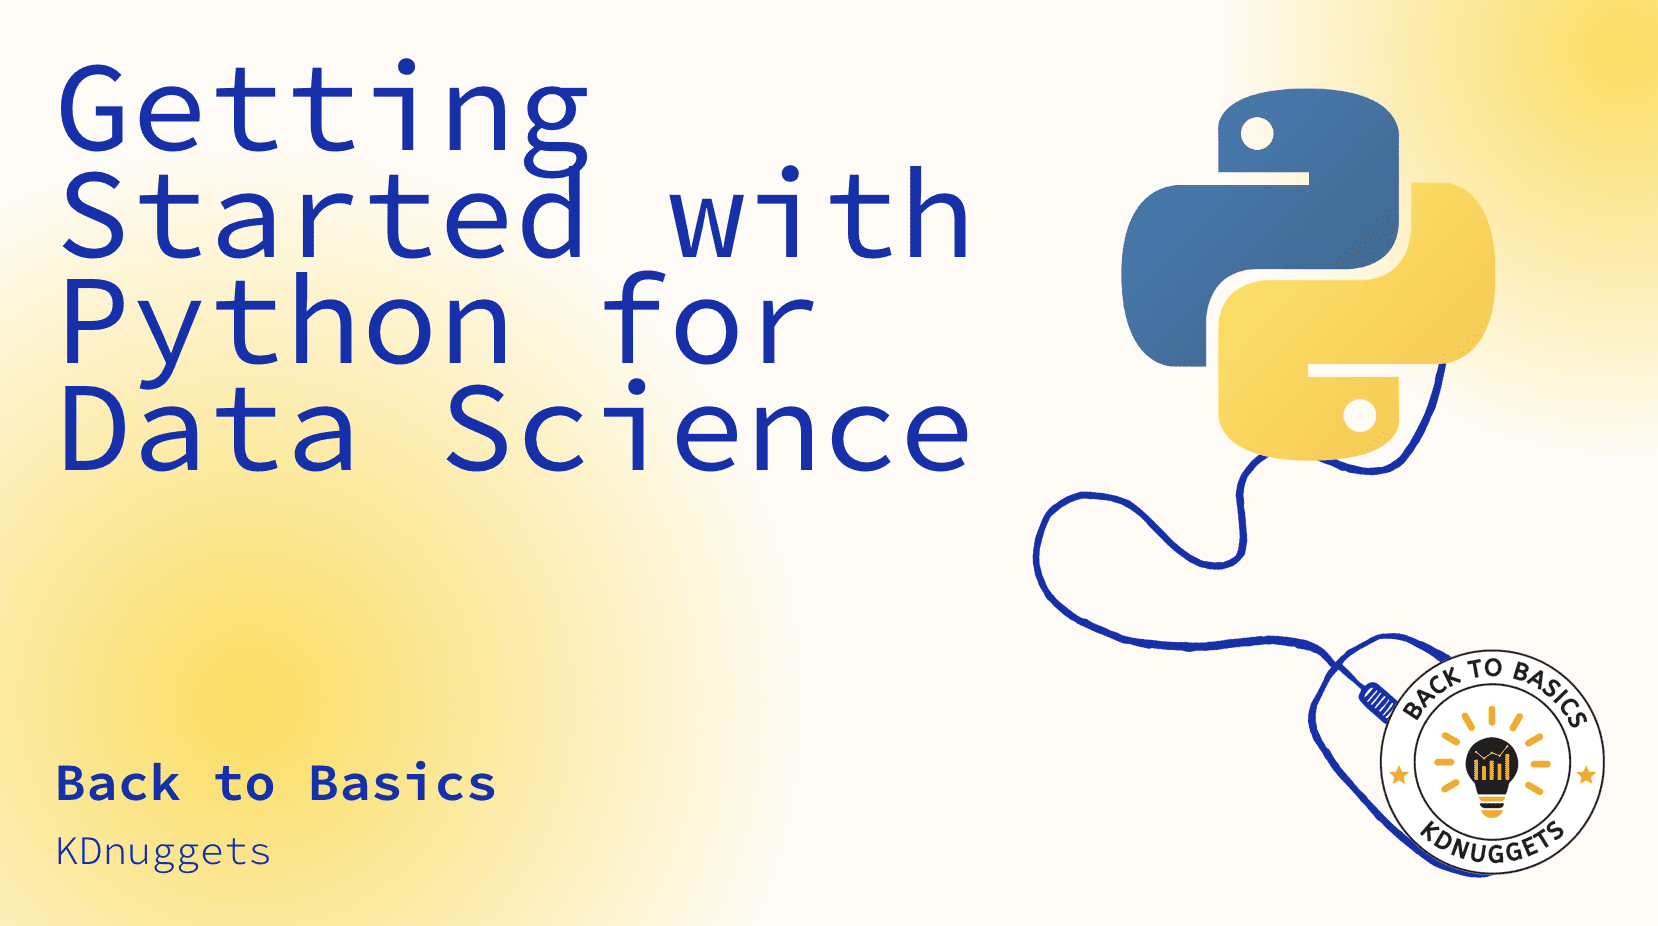 Getting Started with Python for Data Science